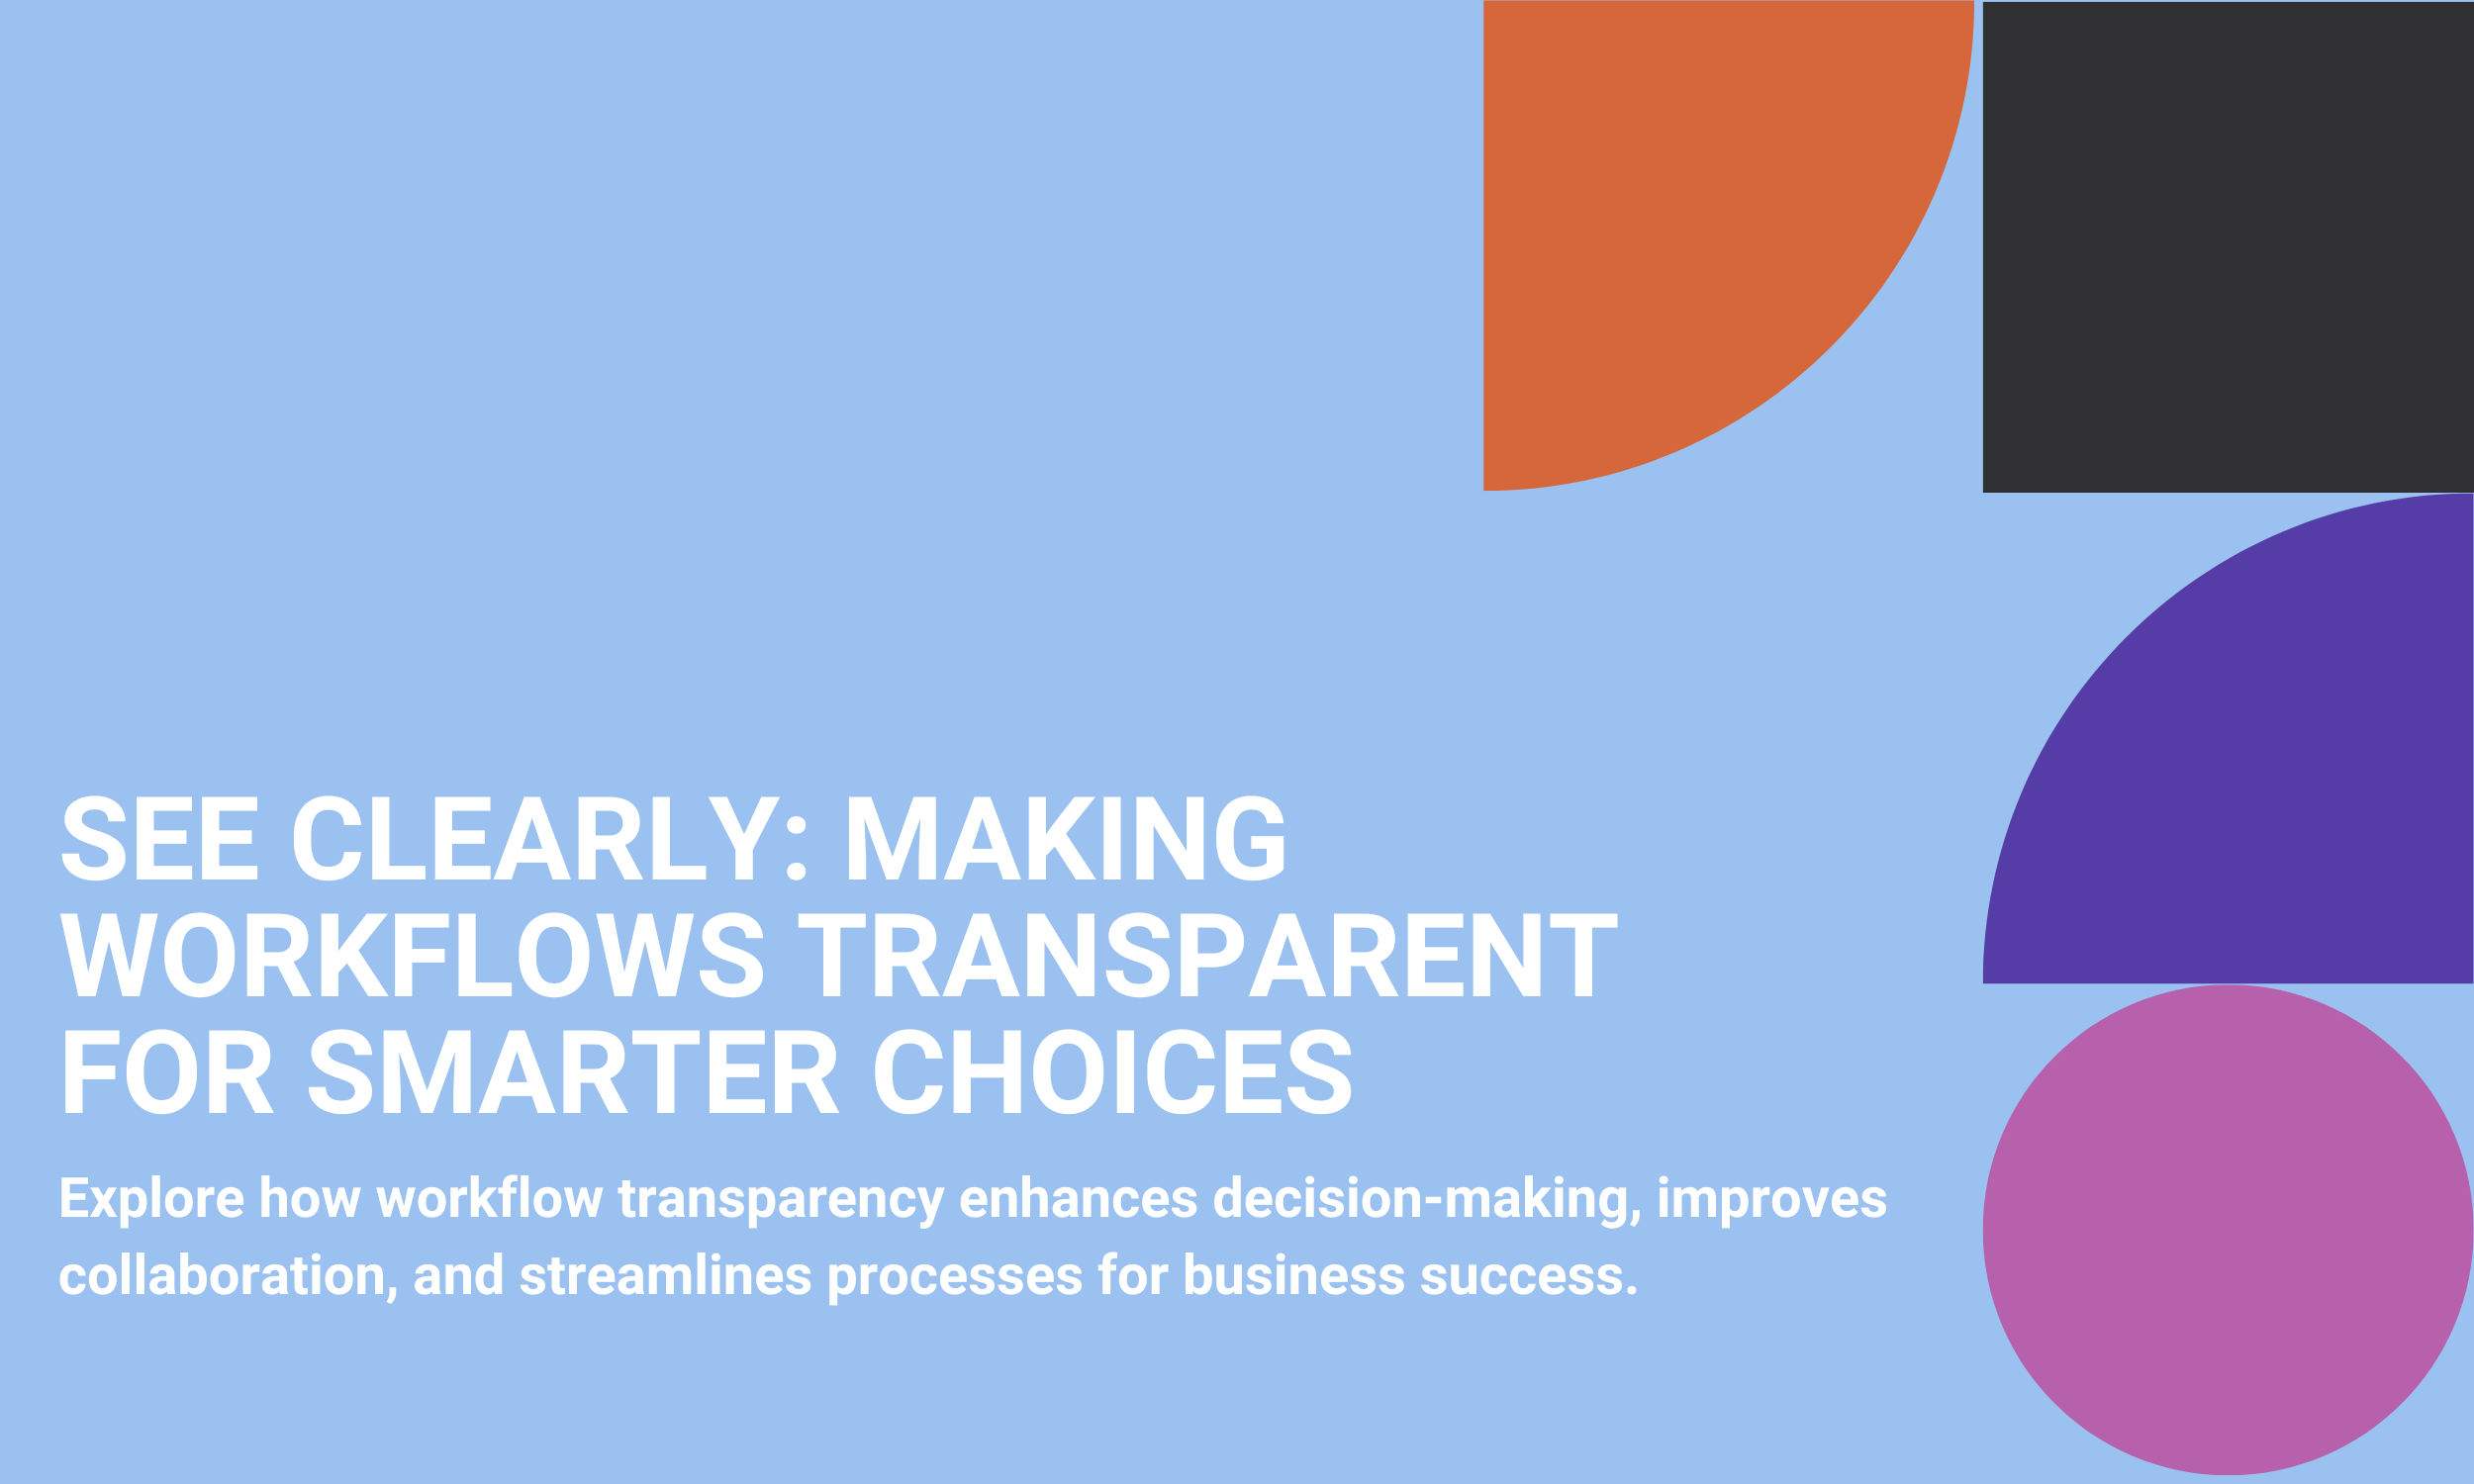 See Clearly: Making Workflows Transparent for Smarter Choices